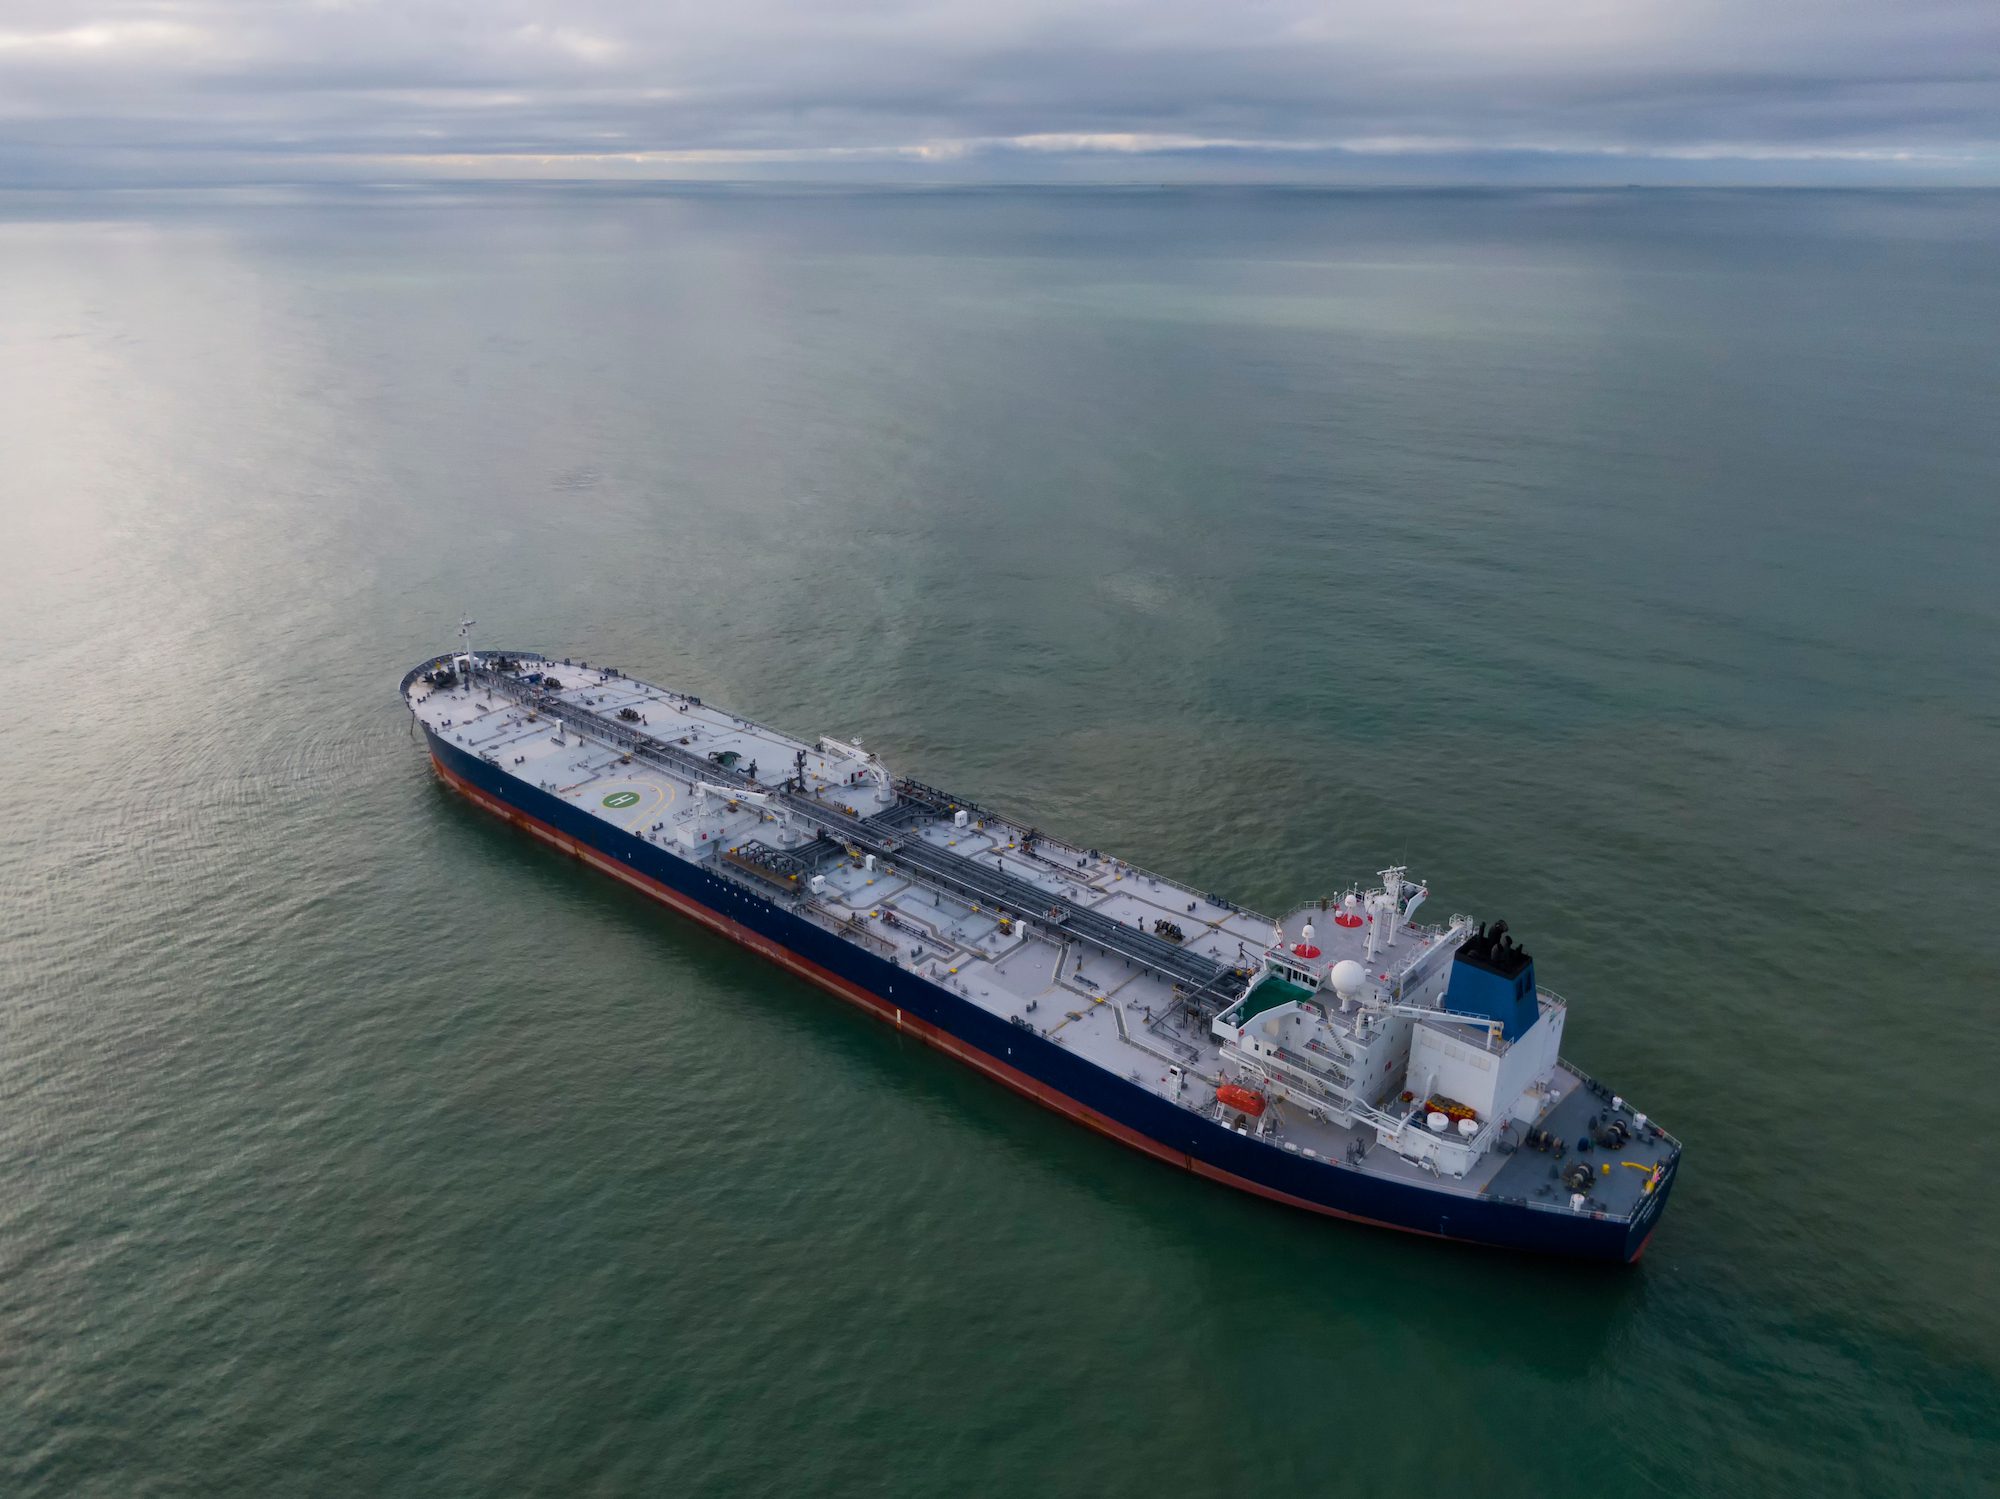 Aerial photo of an oil tanker at anchor. Stock Photo: Nickeo23/Shutterstock